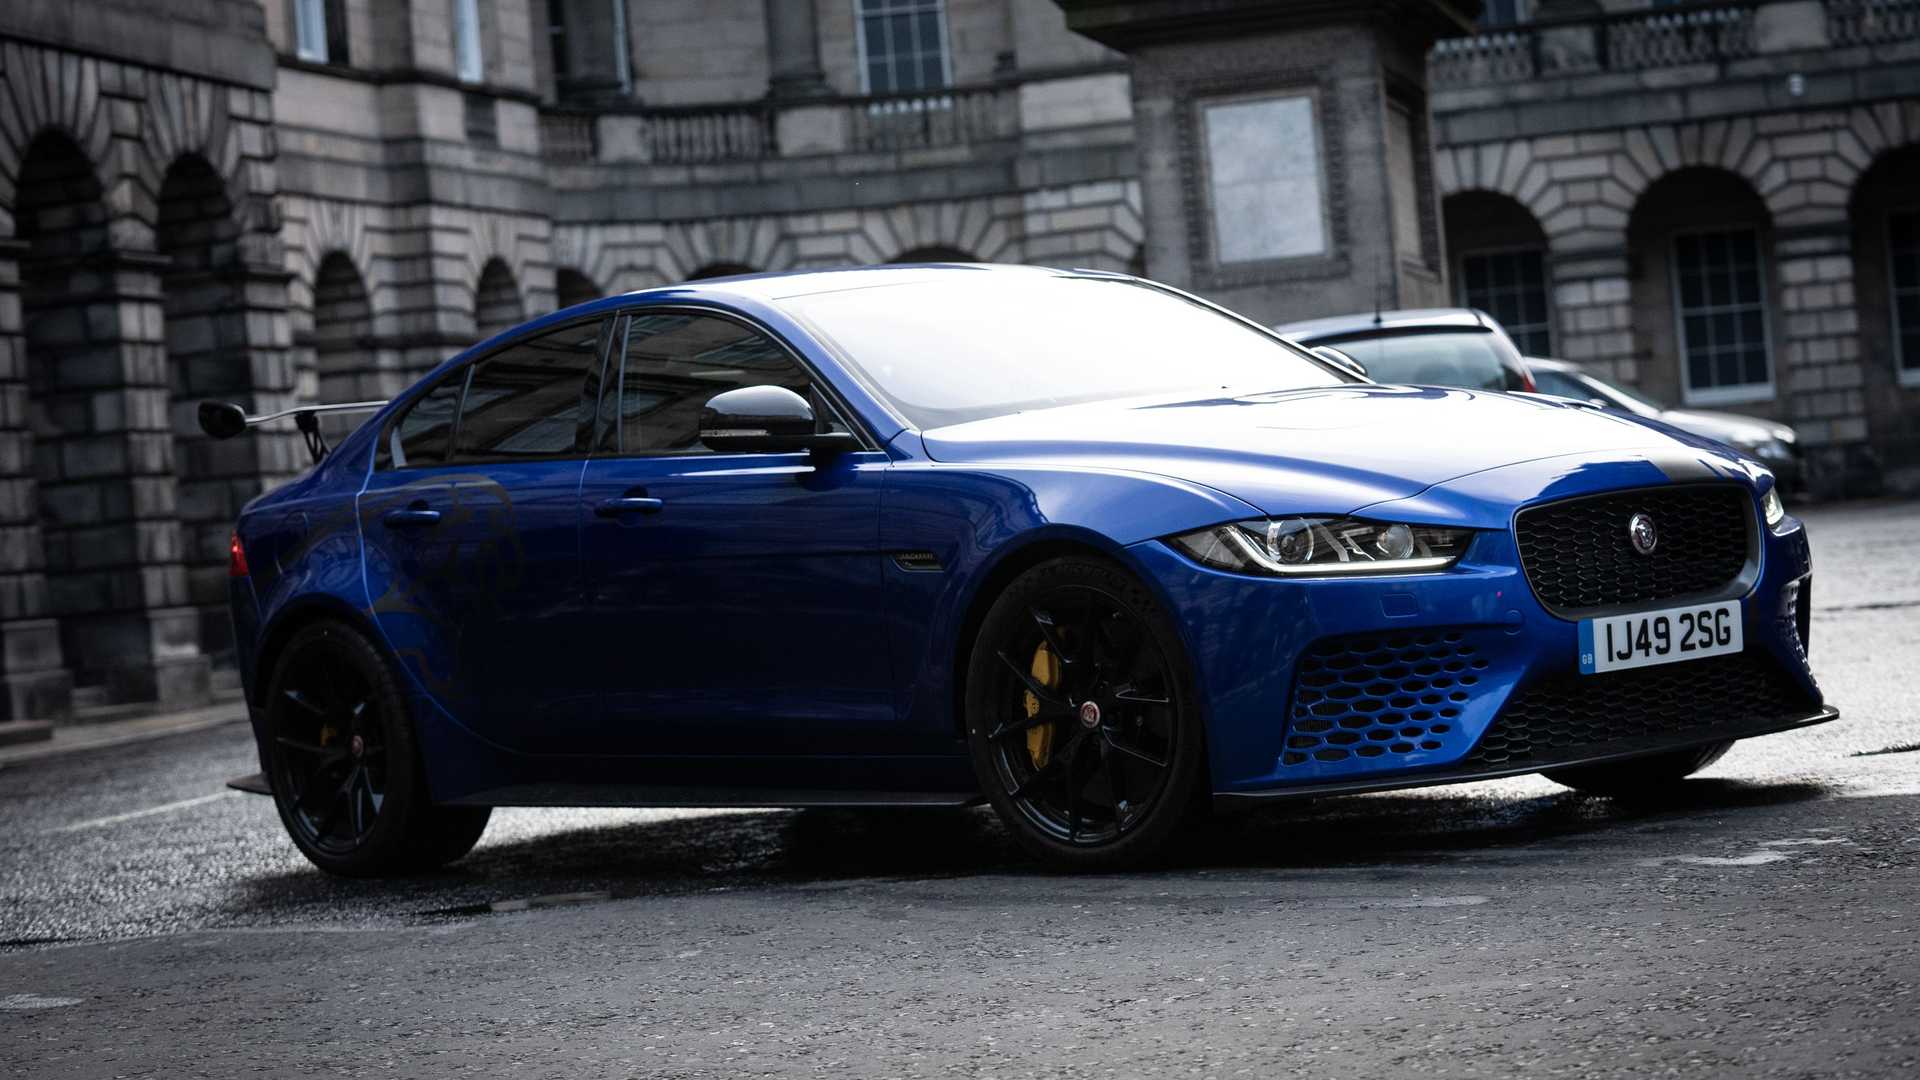 2019 Jaguar XE, The Fast and the Furious Wiki